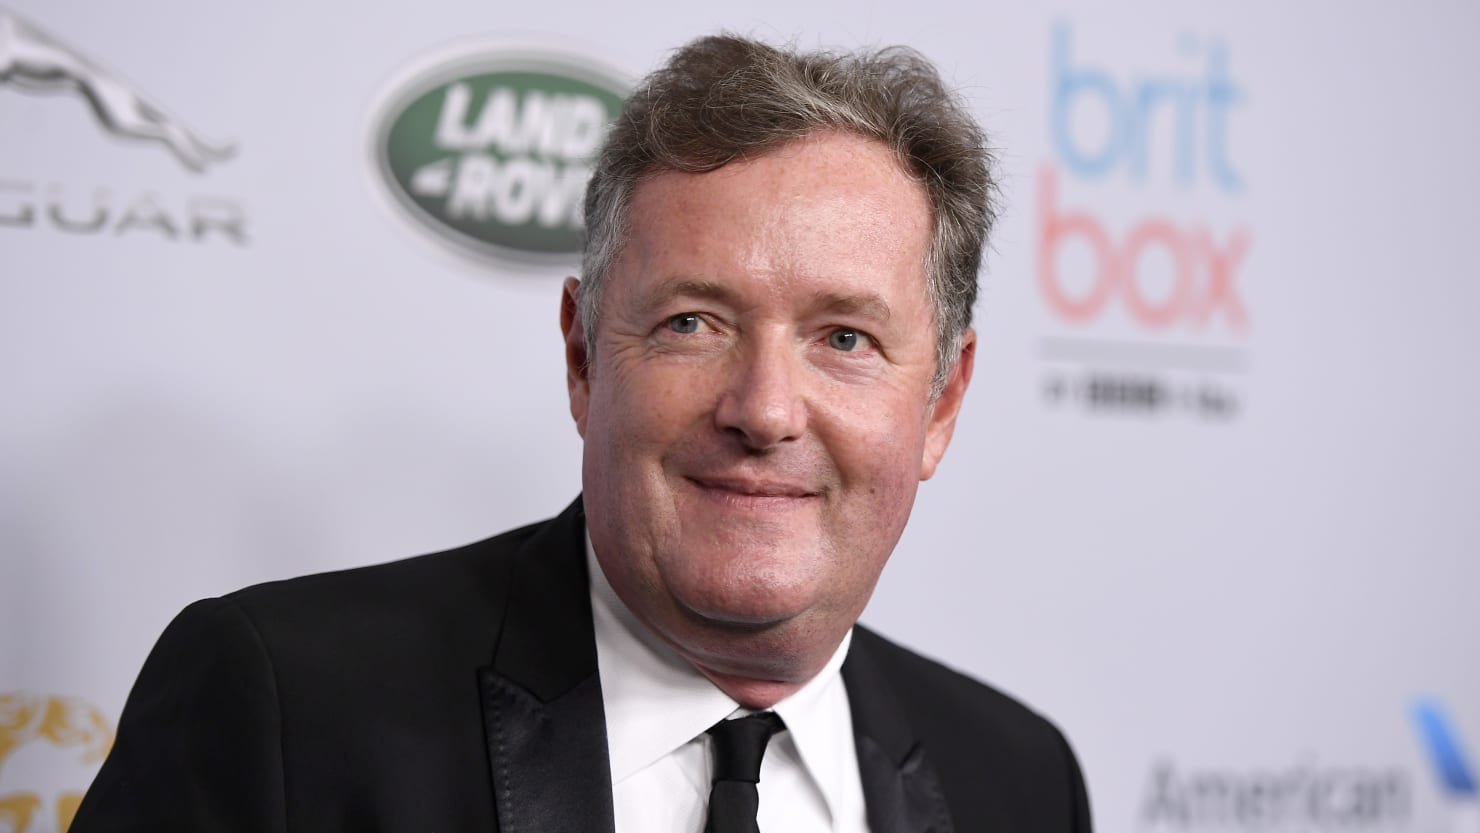 Piers Morgan stops ‘Good Morning Britain’ after storming off during his Meghan Markle Hissyfit